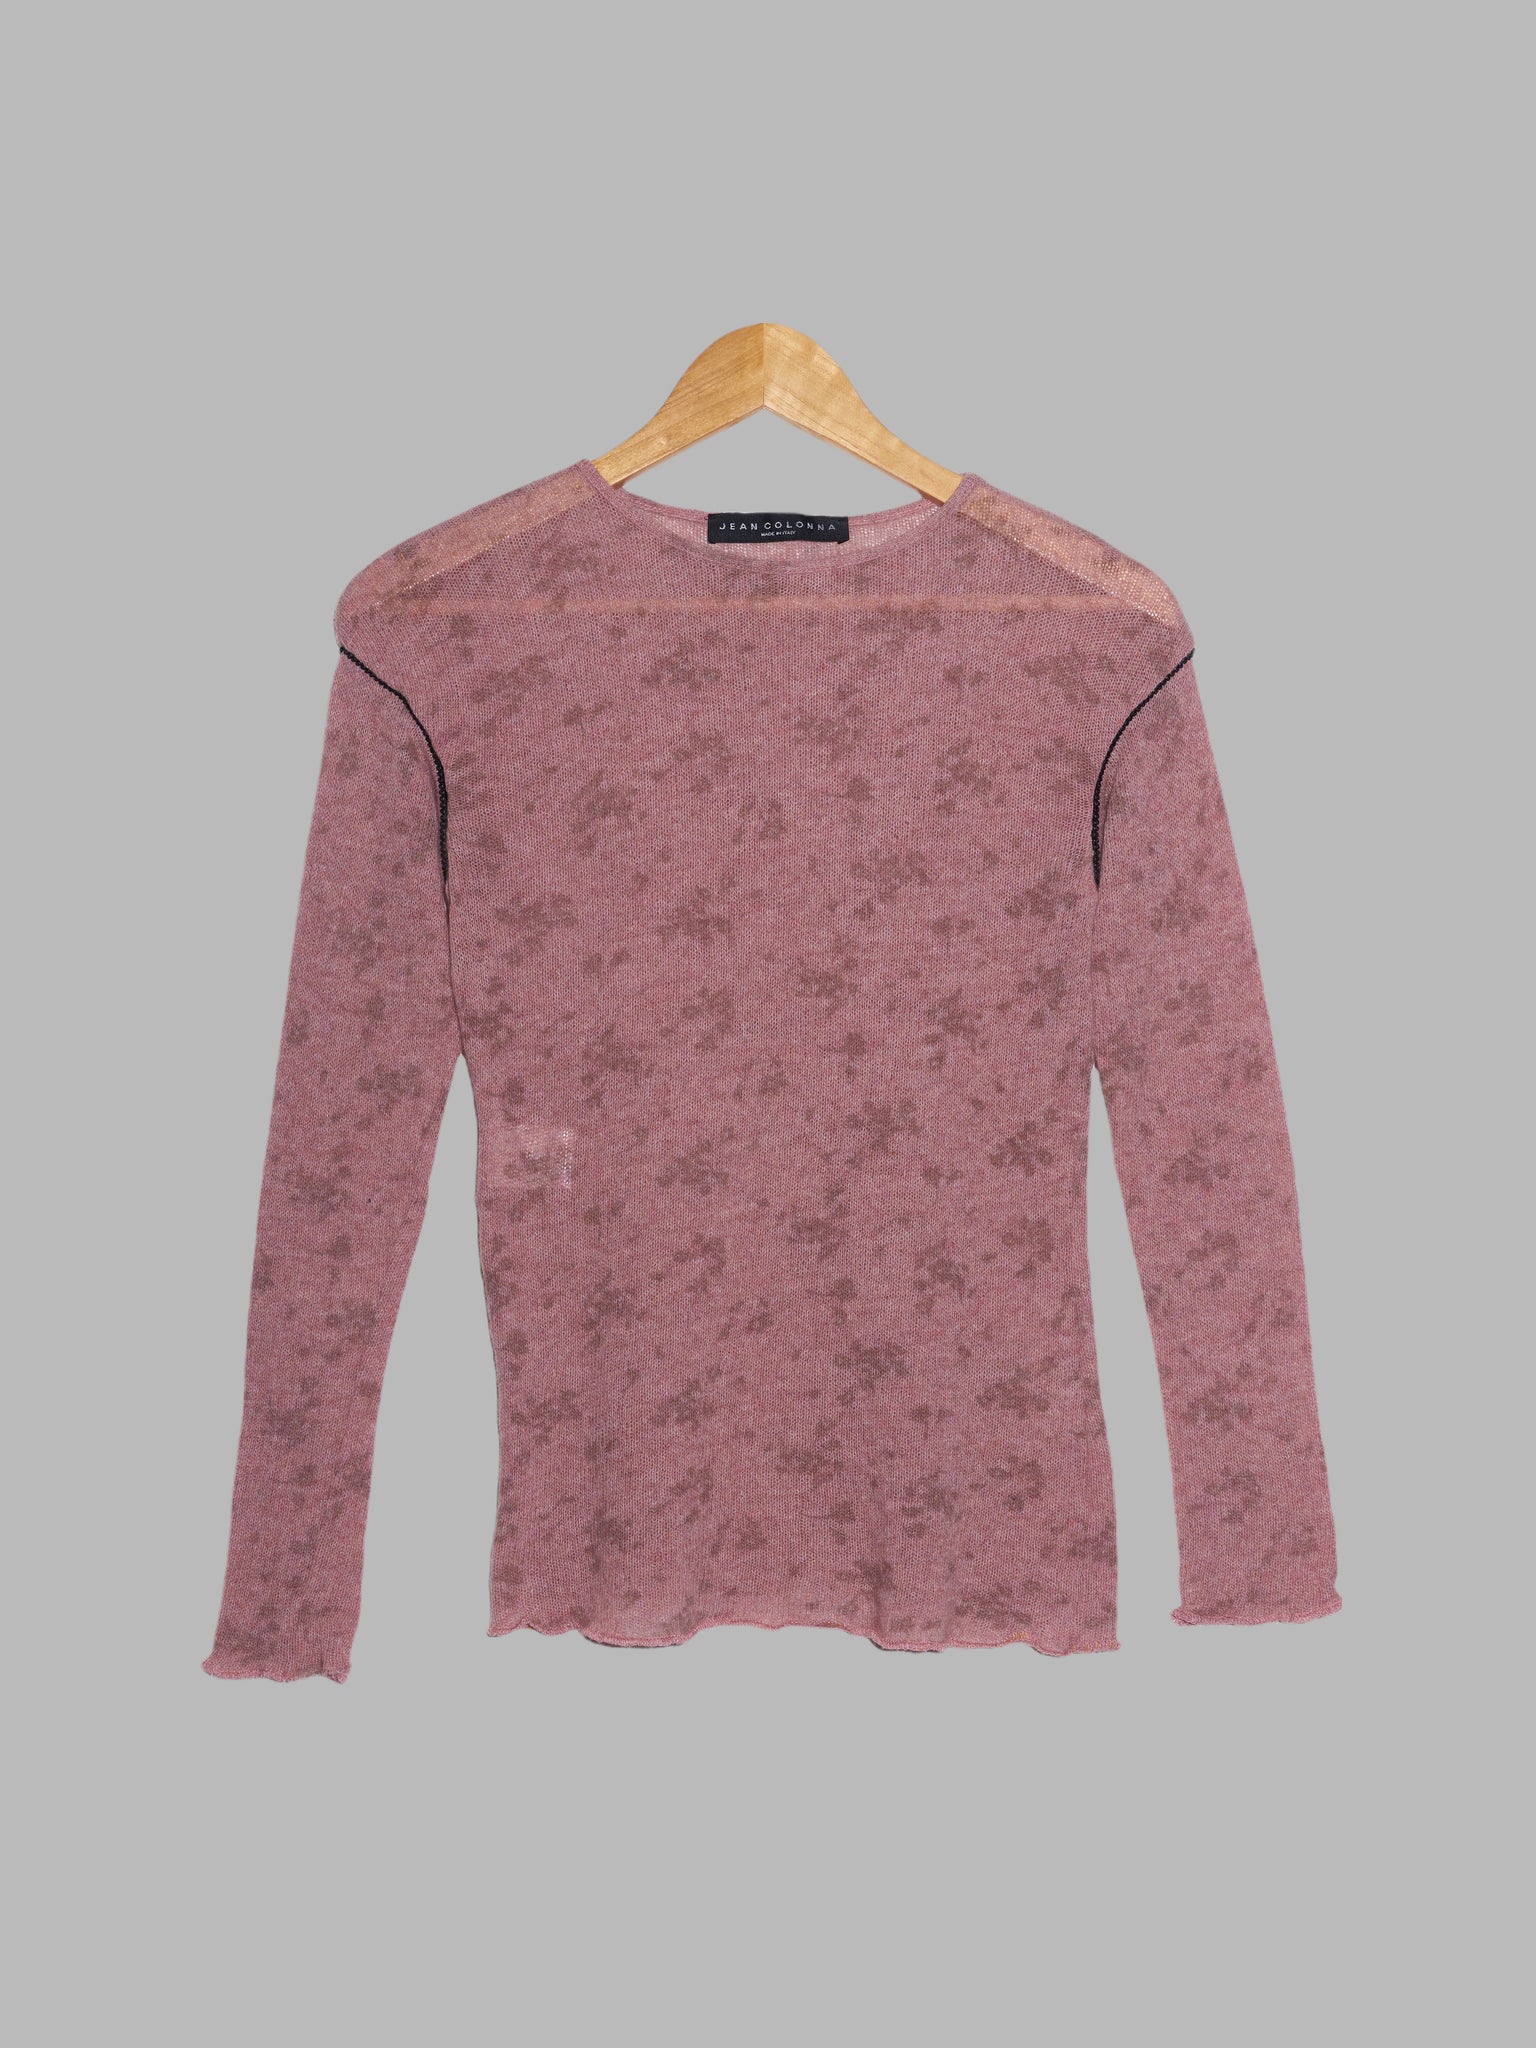 Jean Colonna pink floral print wool long sleeve top with black lace armhole - S